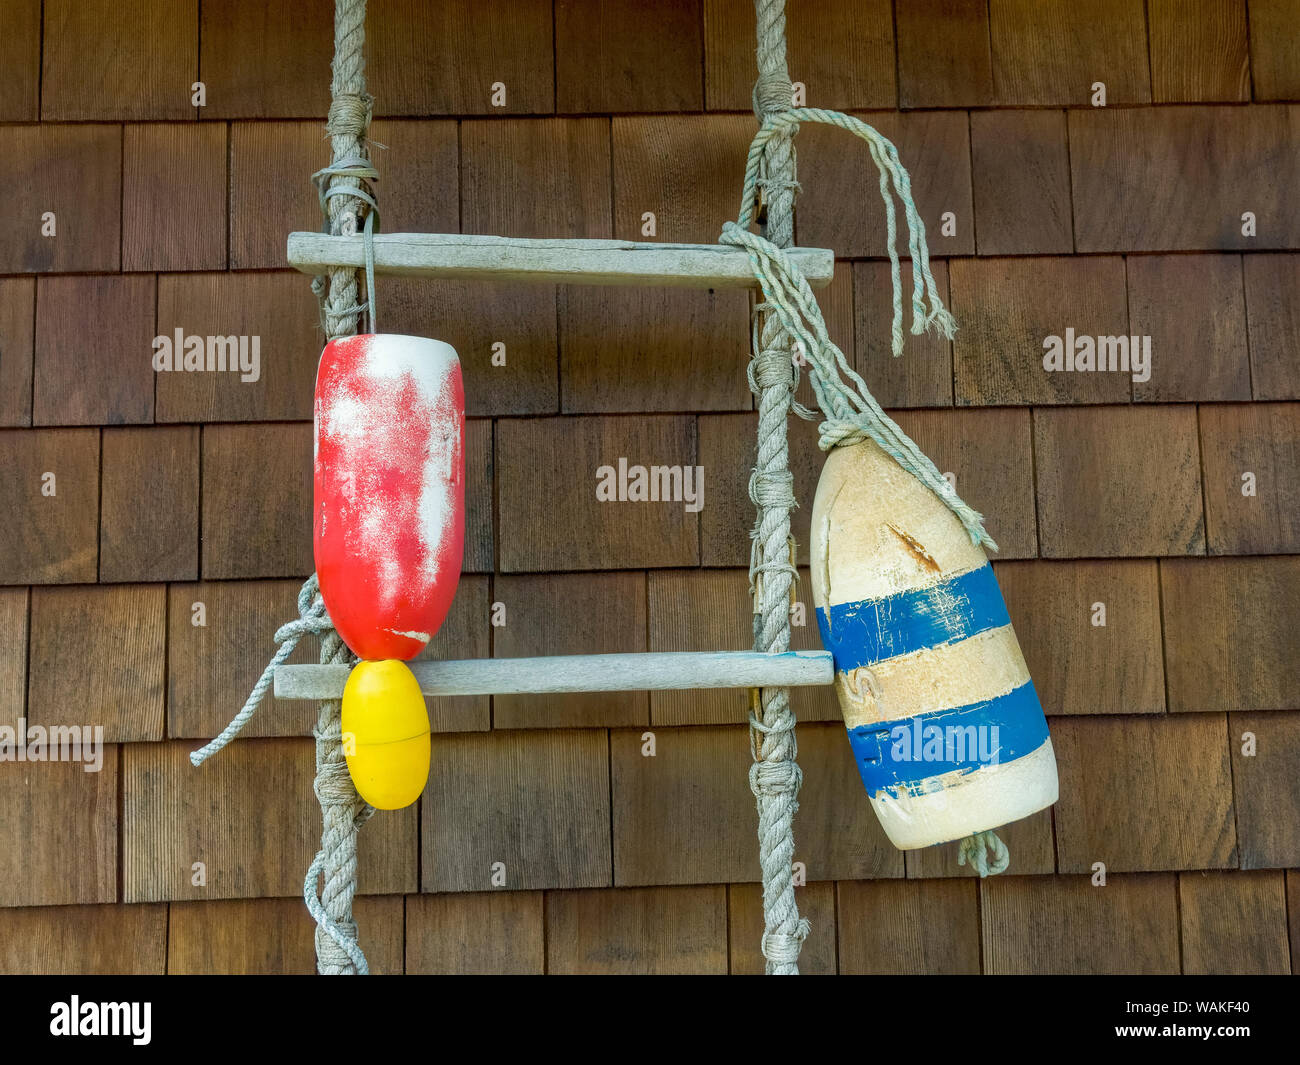 USA, Oregon, Cannon Beach. Two buoys and rope ladder against a shingled wall. Credit as: Wendy Kaveney / Jaynes Gallery / DanitaDelimont.com Stock Photo